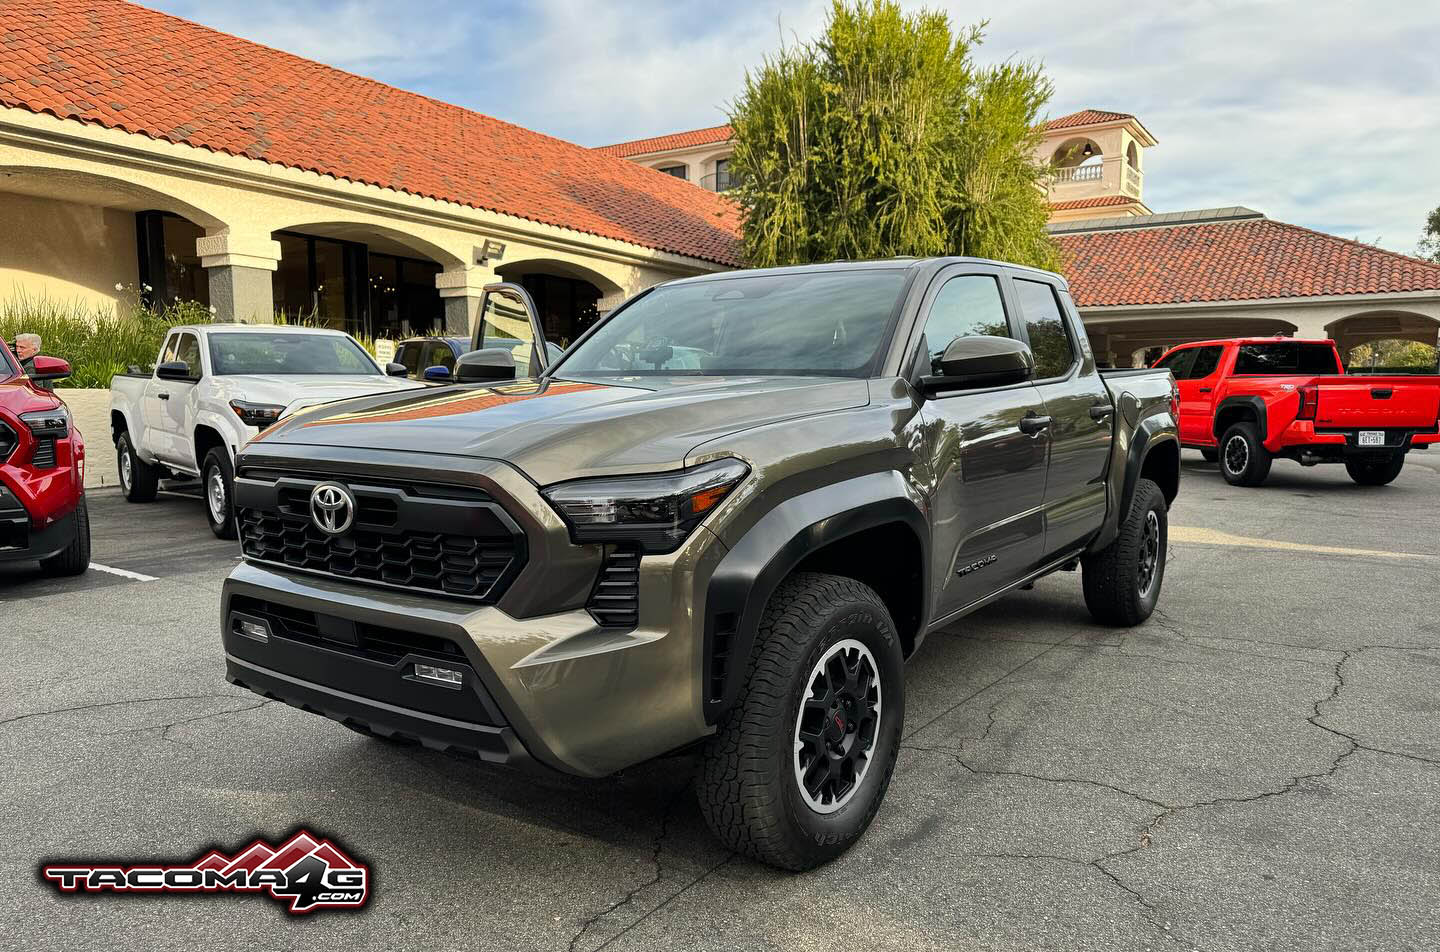 2024 Tacoma All 2024 Tacoma trims (SR, SR5, Limited, PreRunner, Limited, Trailhunter, TRD Sport/Offroad/Pro) in many colors @ media drive Bronze Oxide 2024 Tacoma TRD Offroad